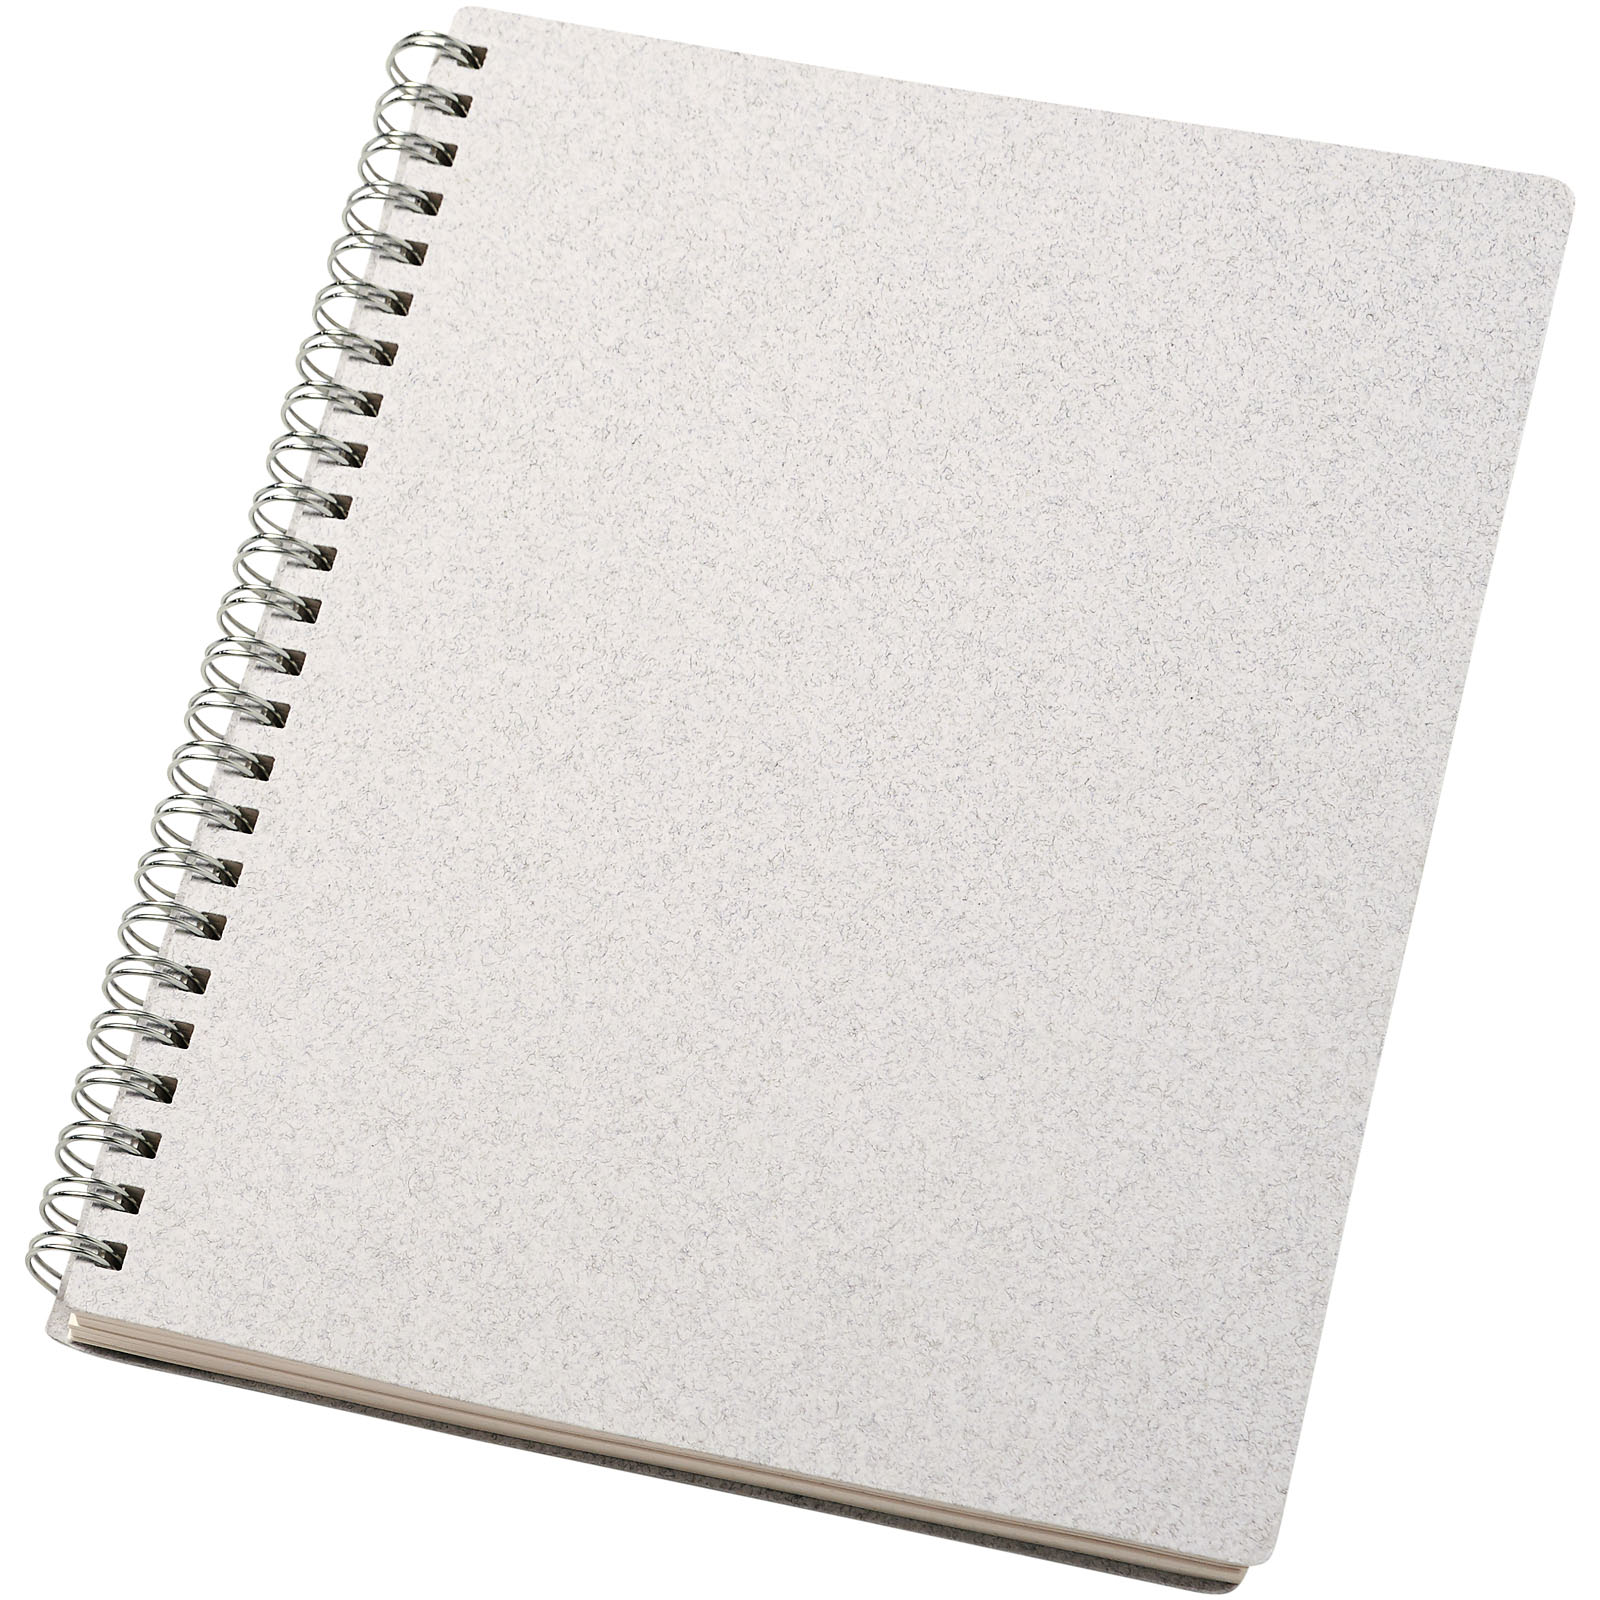 Dotted notebook CLIME made of recycled materials, format A5 - white